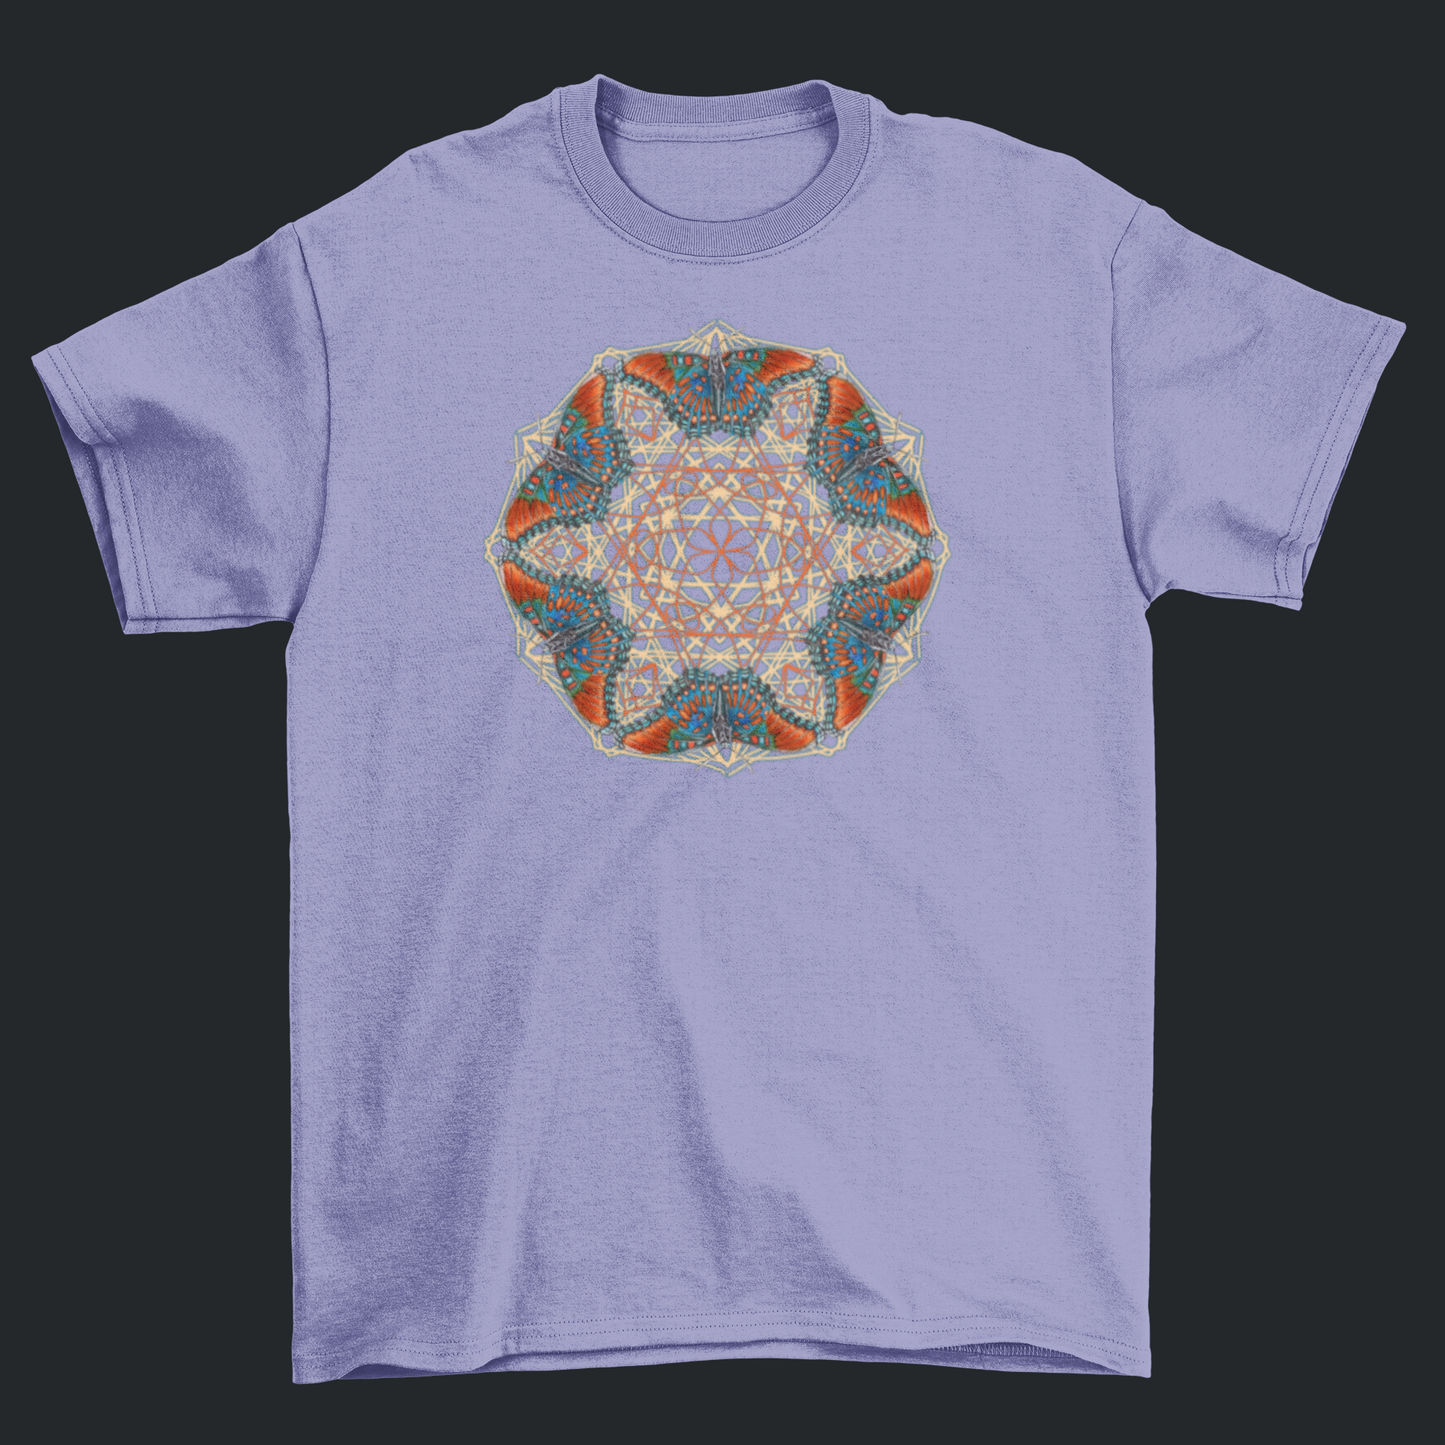 Red Spotted Purple Butterfly Mandala T-Shirt